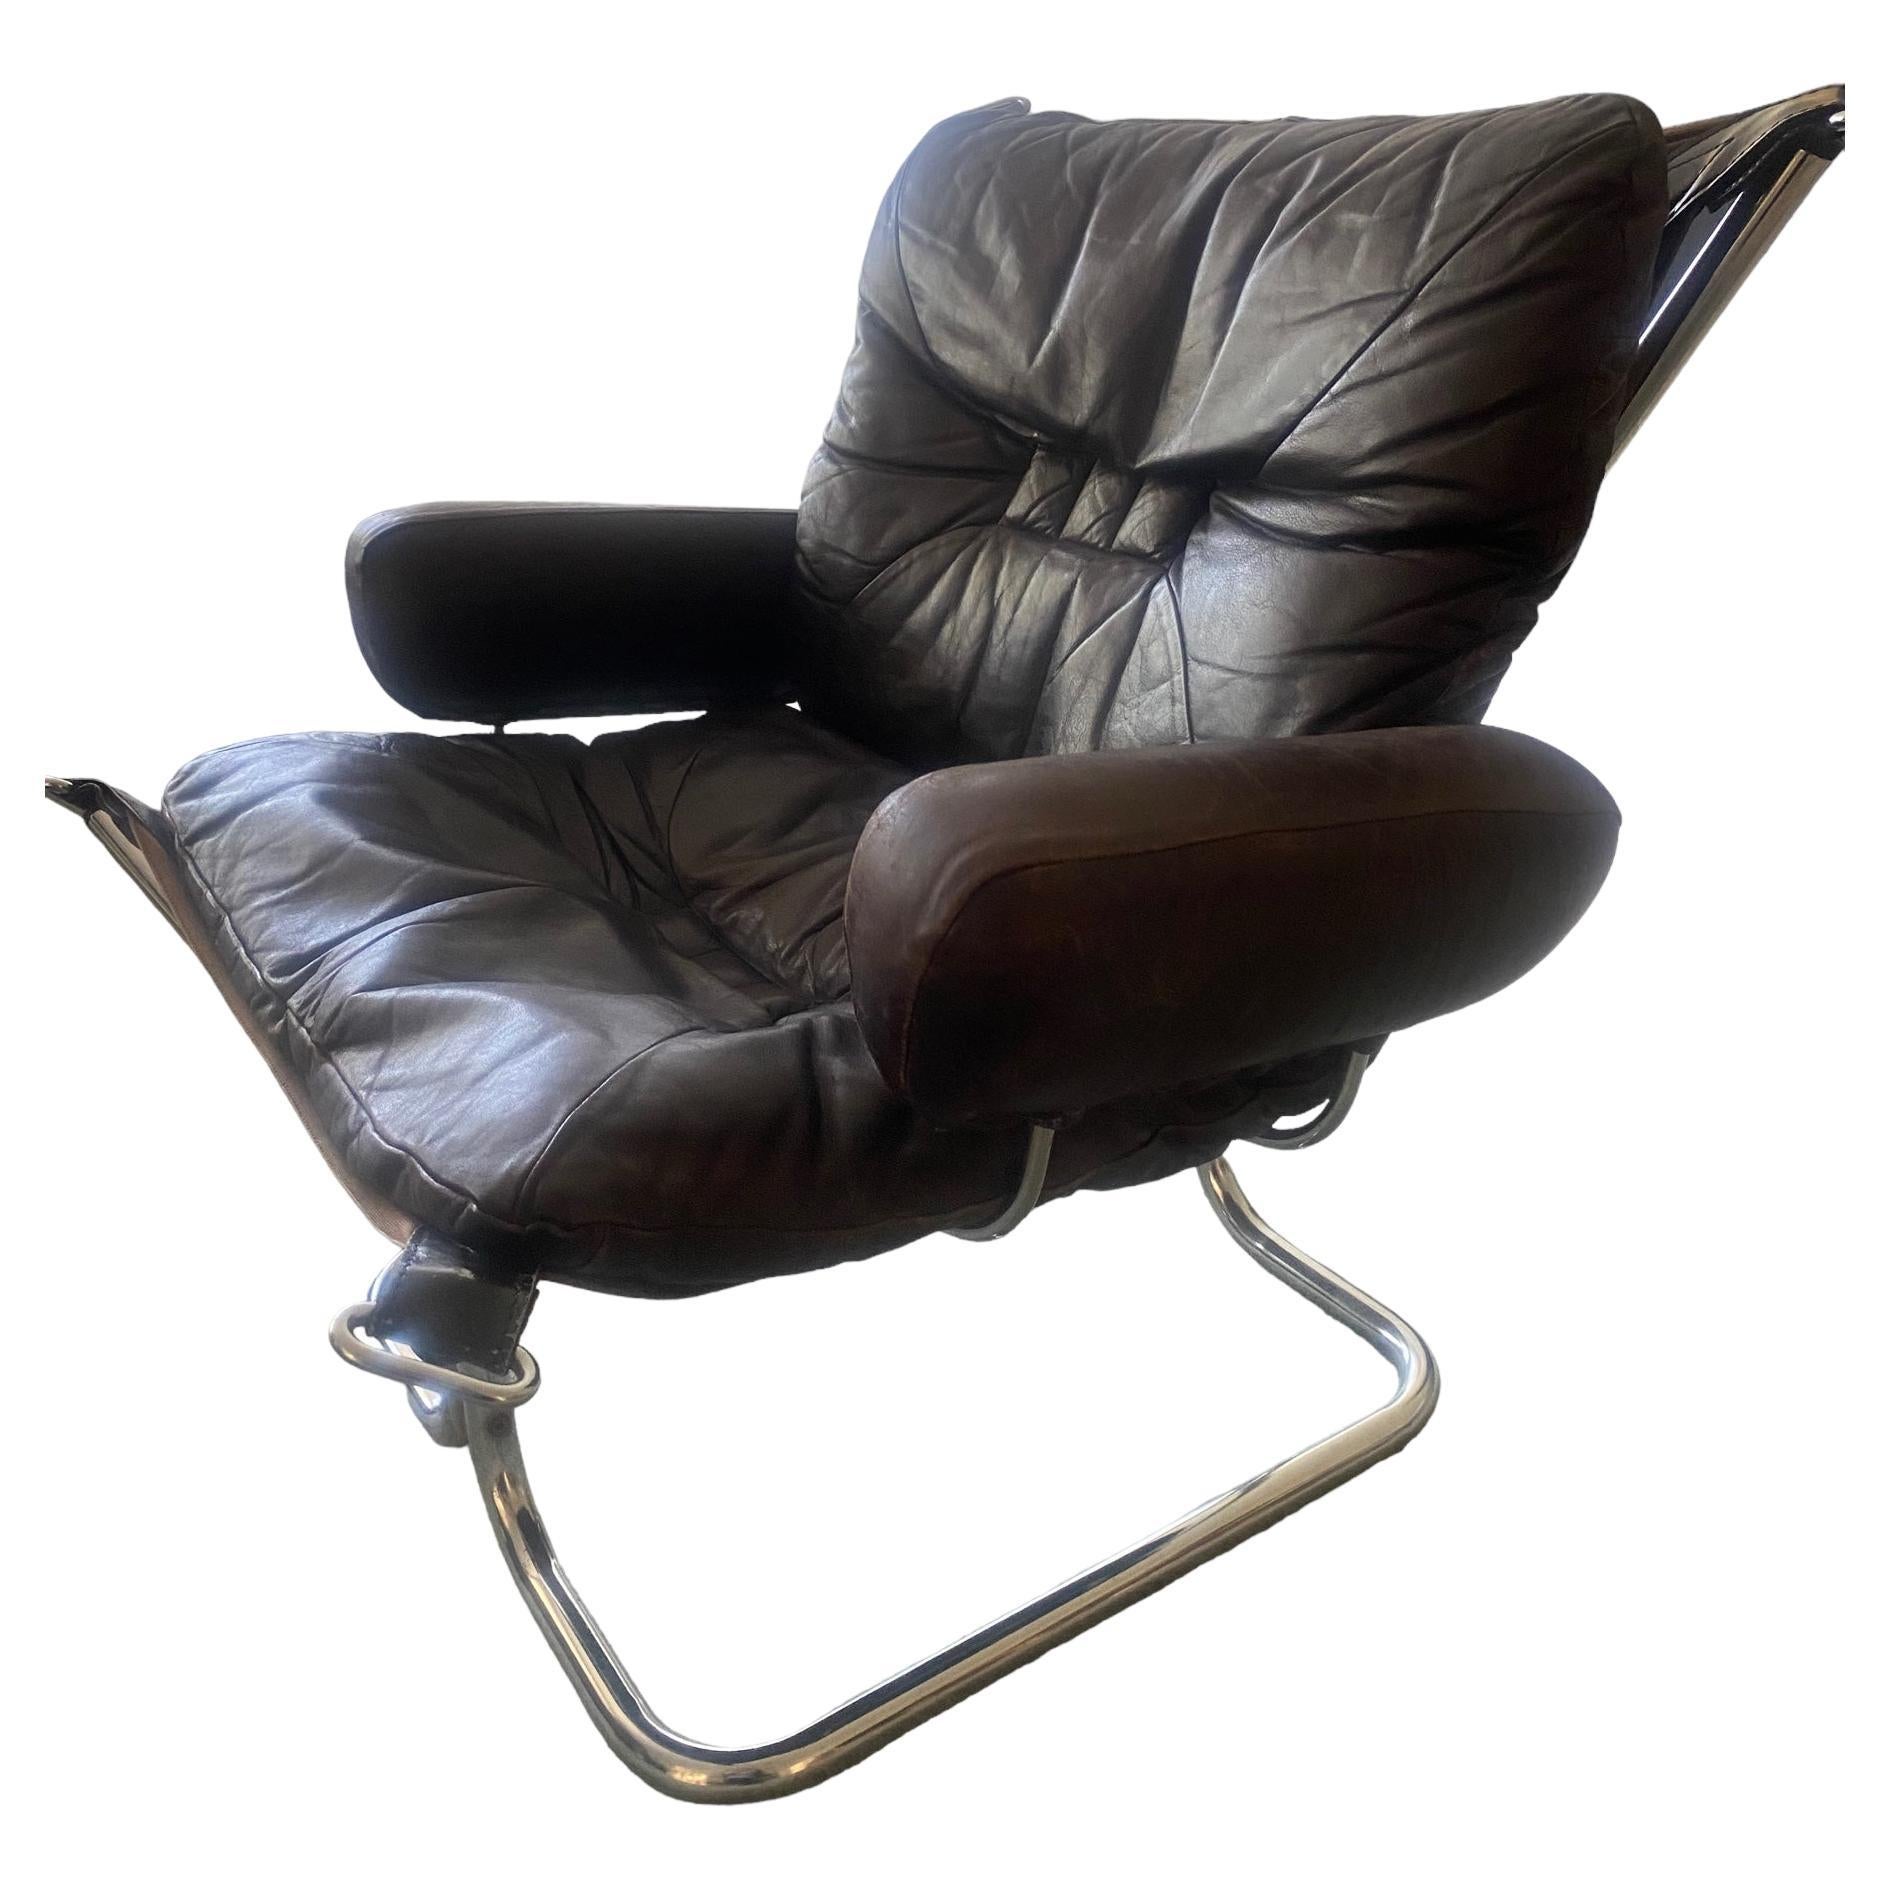 This slingback chair by Harald Relling stands out for its luxurious use of materials and fine attention to detail. The armrests are attached with a stitched leather eye and loop , almost like saddle joinery. The leather is soft aniline leather, and